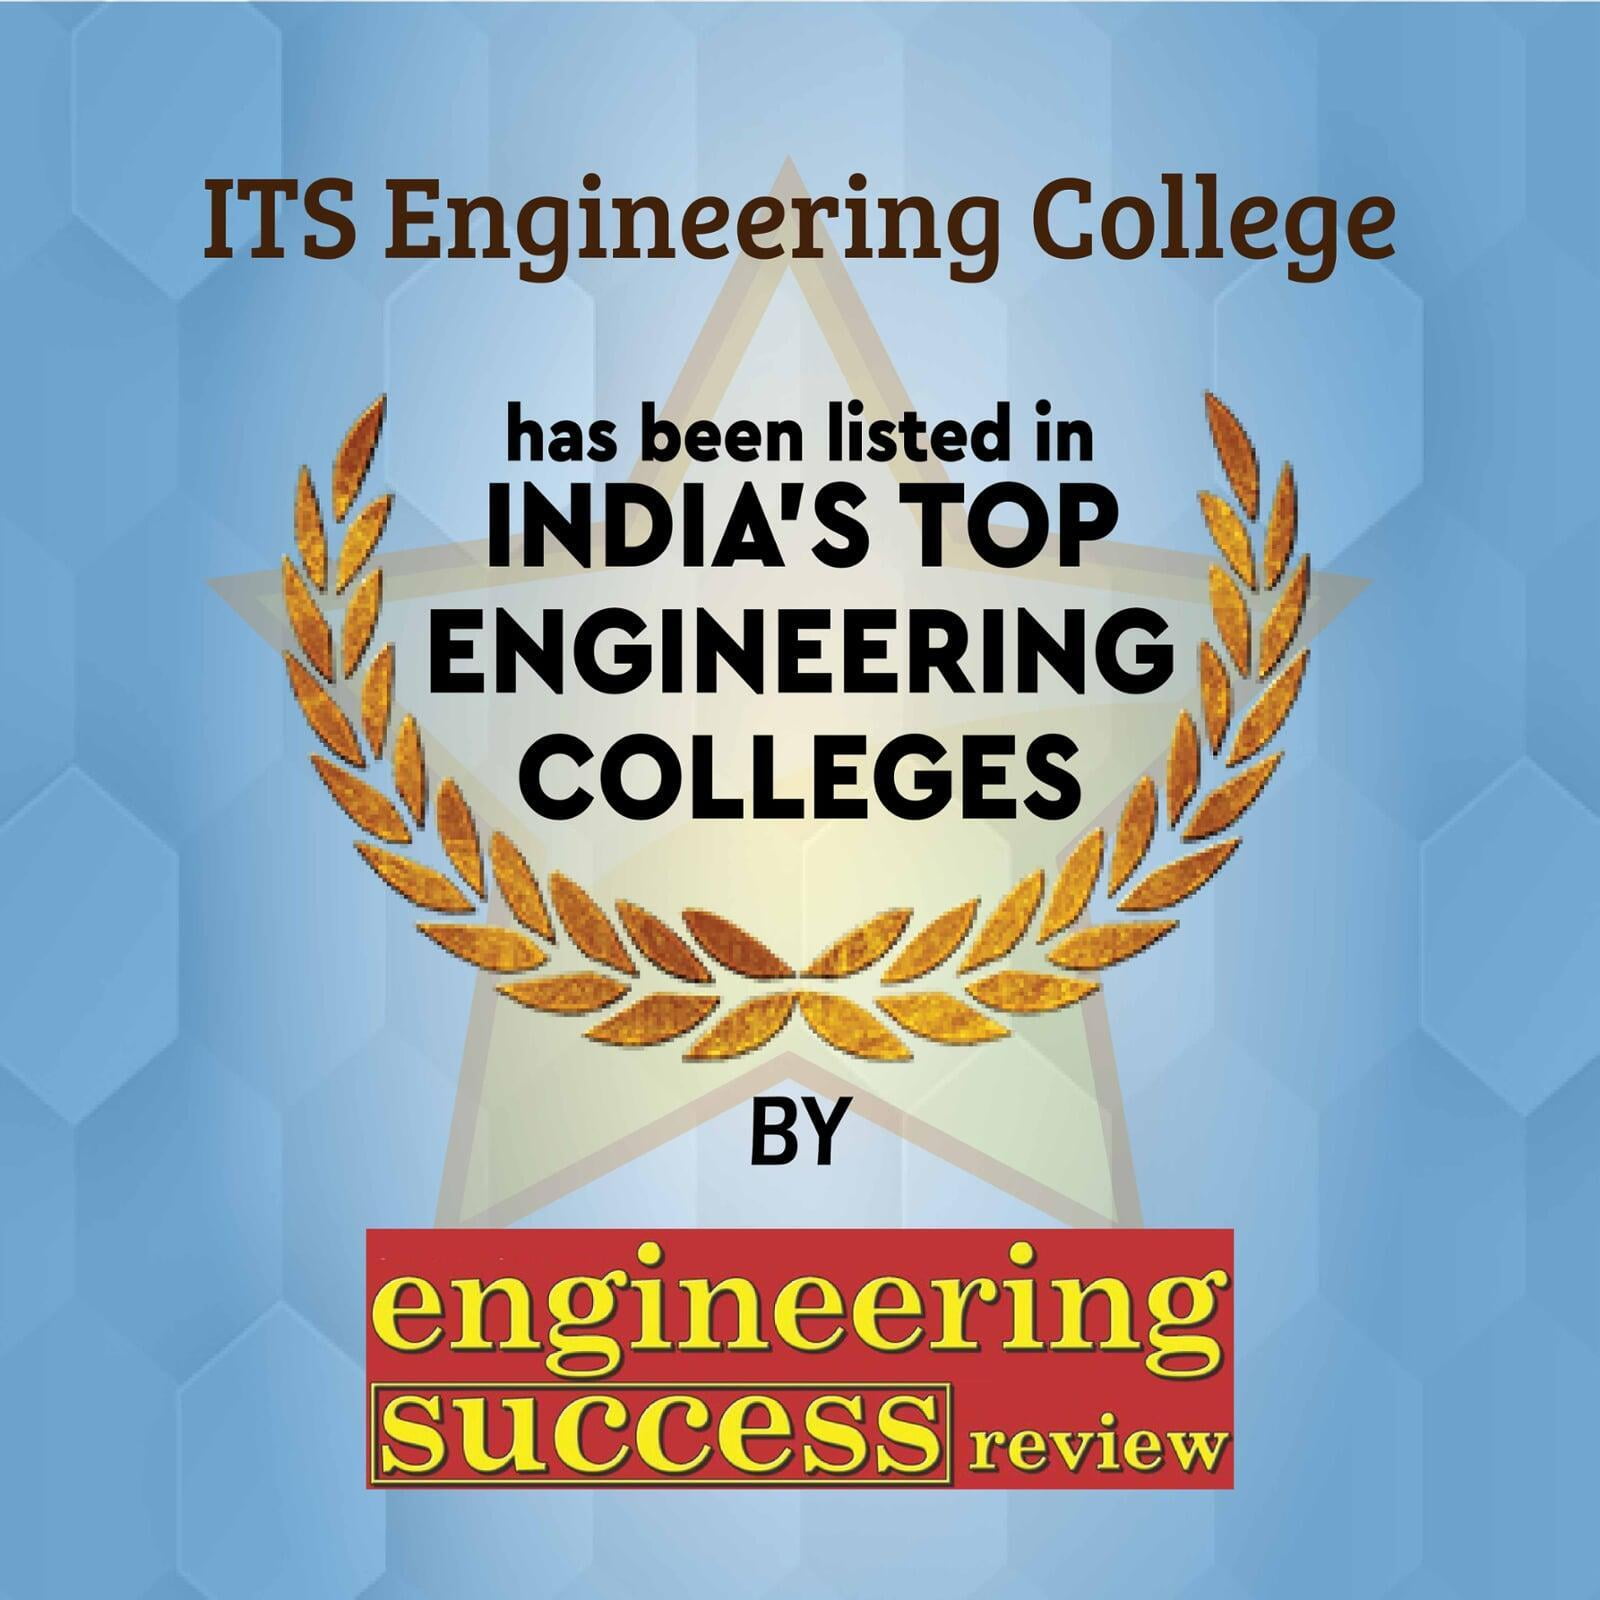 India's Top Engineering Colleges by Engineering Success Review